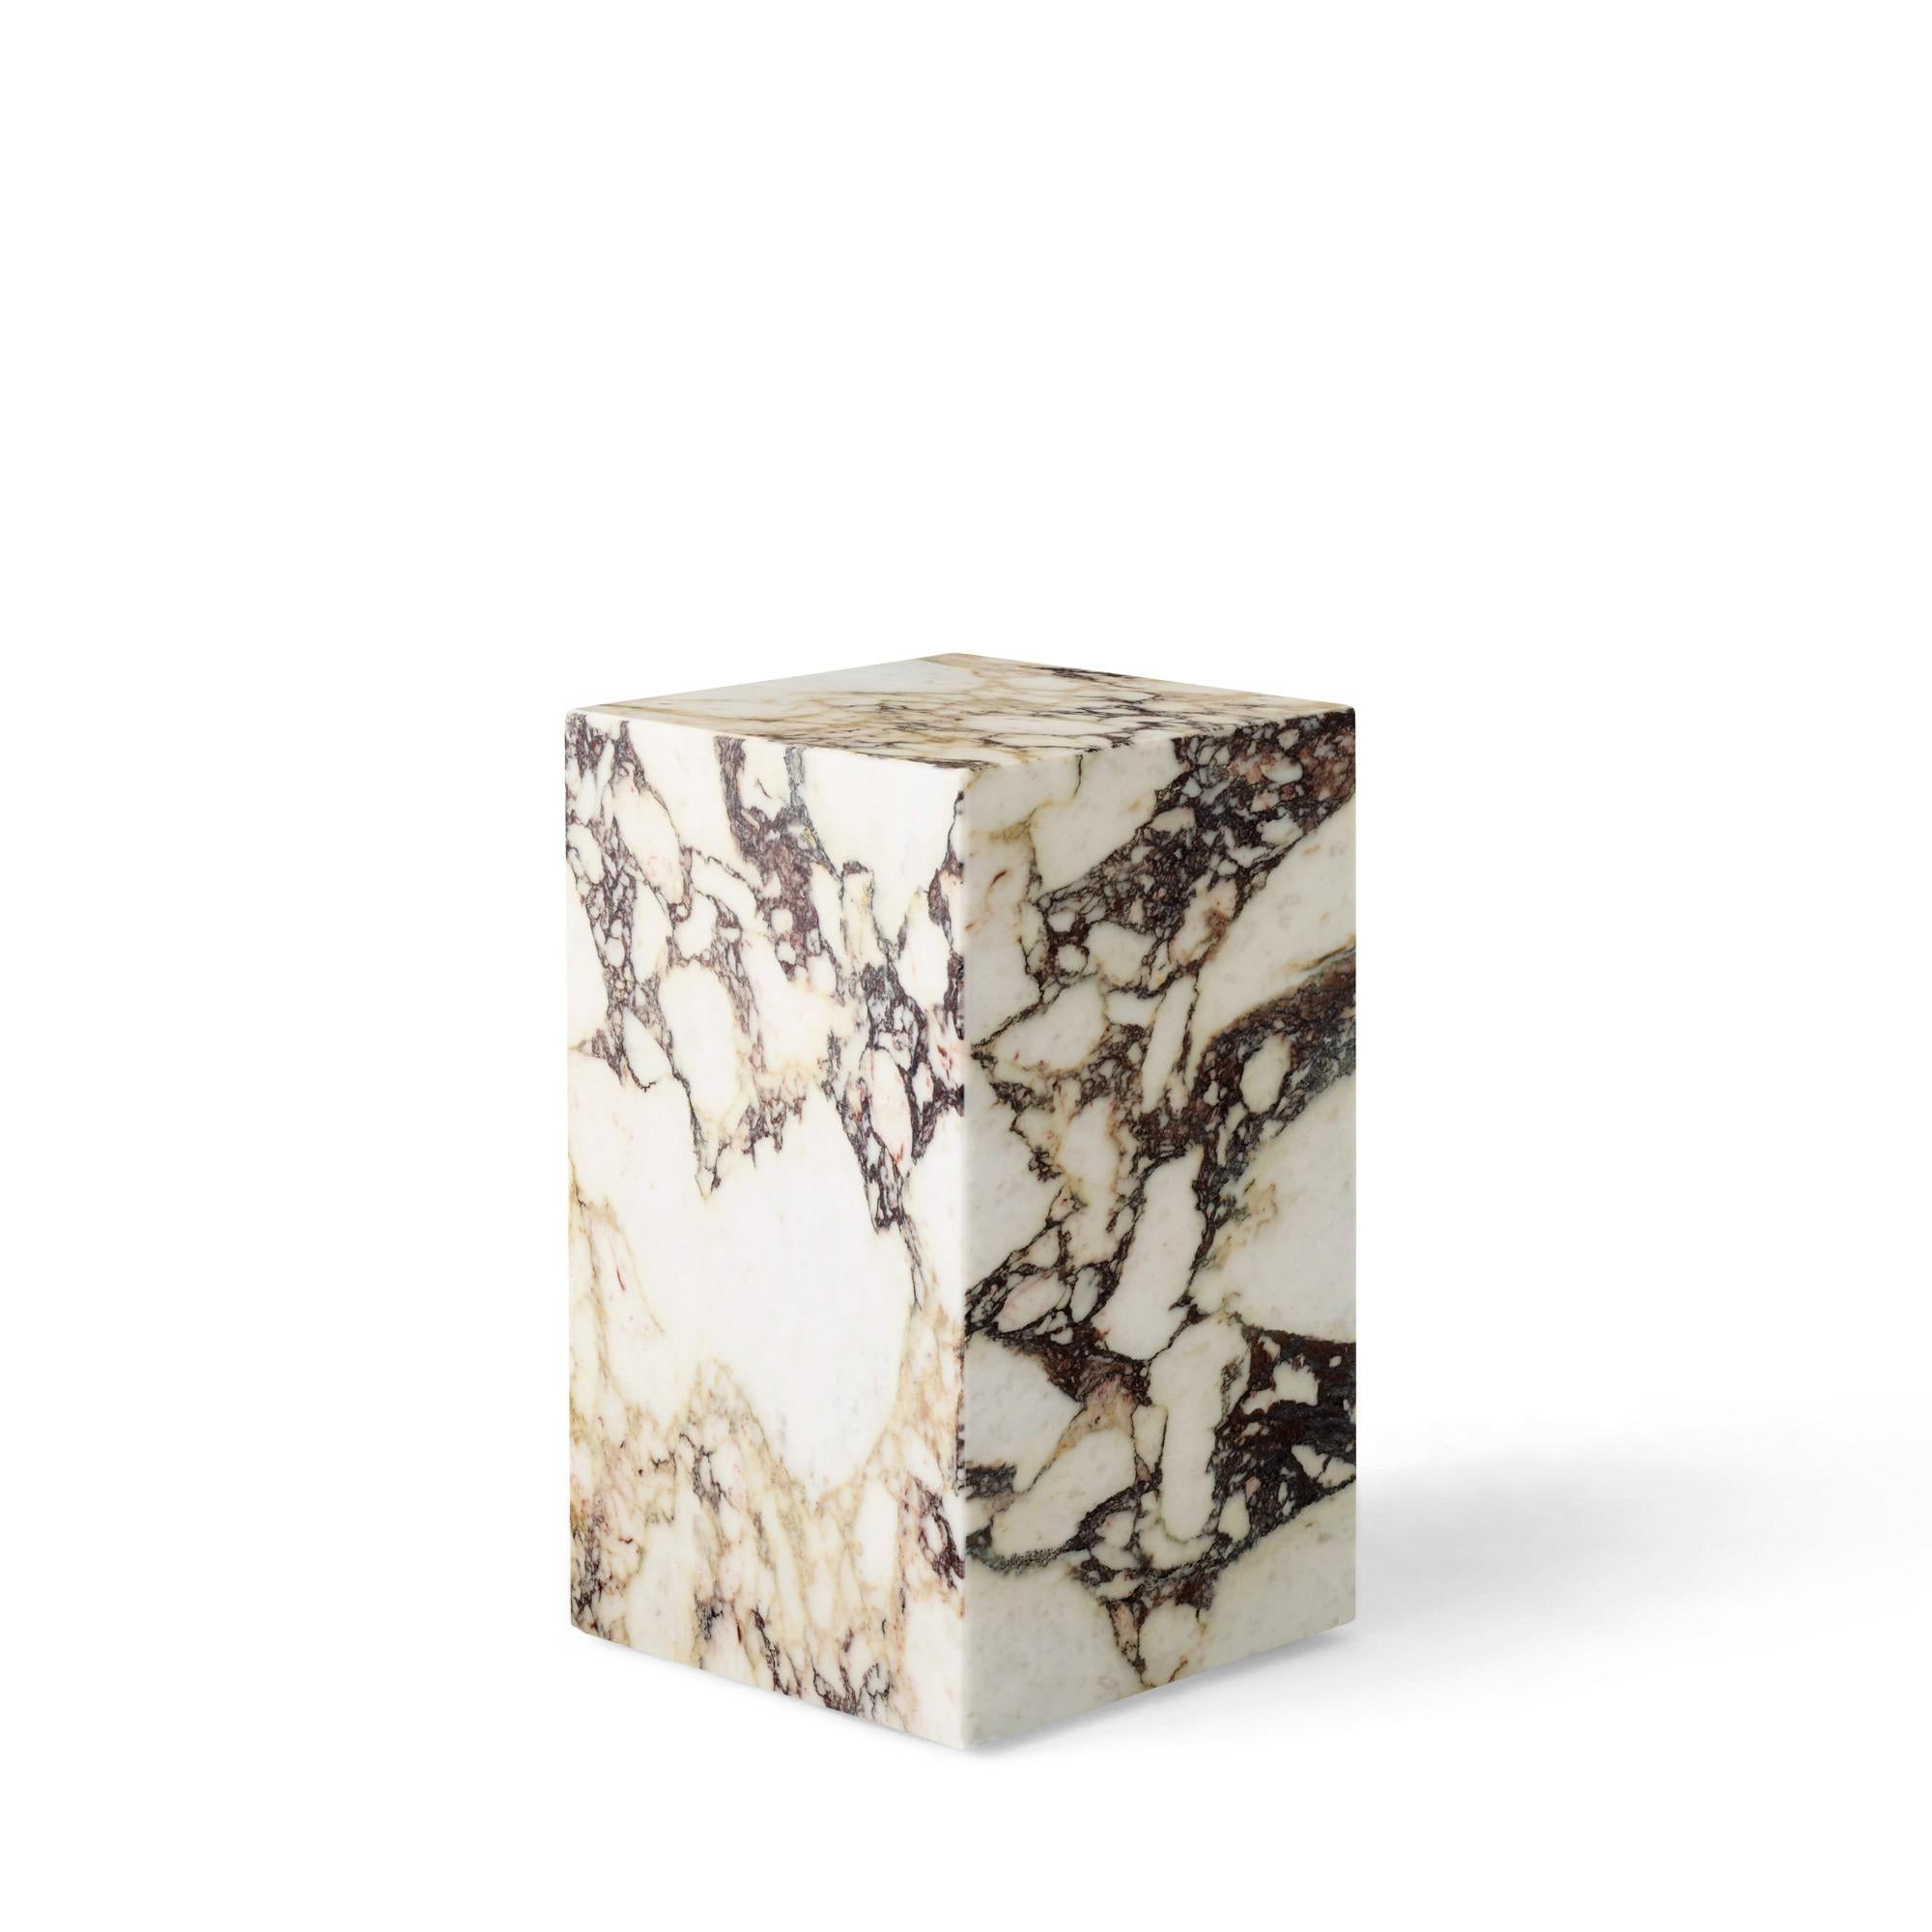 As versatile as it is timeless, the marble Plinth serves the Dual purpose of being a beautiful, sculptural piece on its own and highlighting whatever objects rest upon it. The honed marble carries an air of sophistication and elegance to elevate any